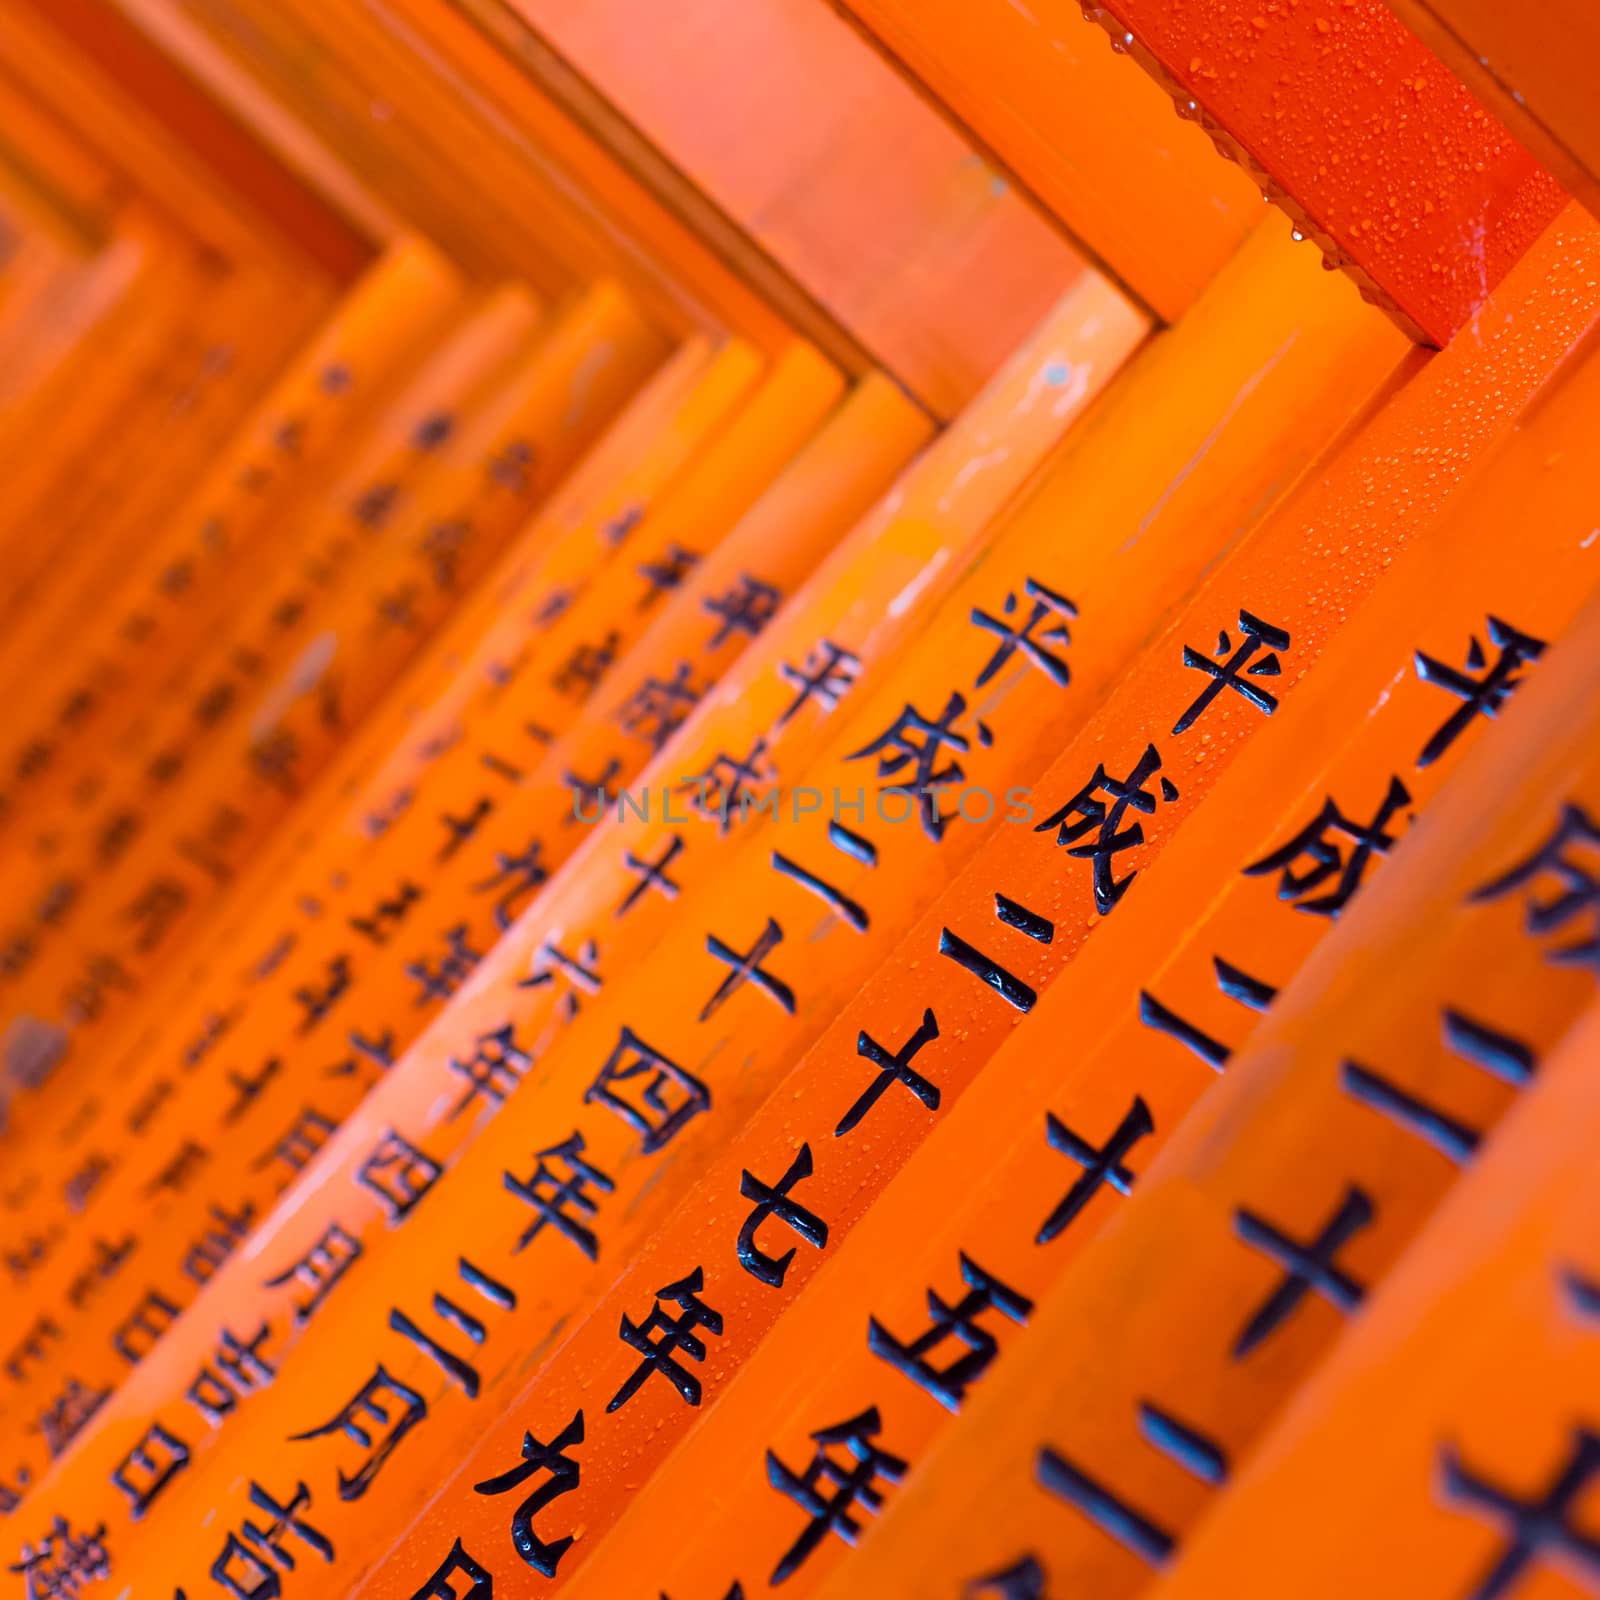 Red wooden Tori Gate at Fushimi Inari Shrine in Kyoto, Japan. Selective focus on traditional japanese writing.